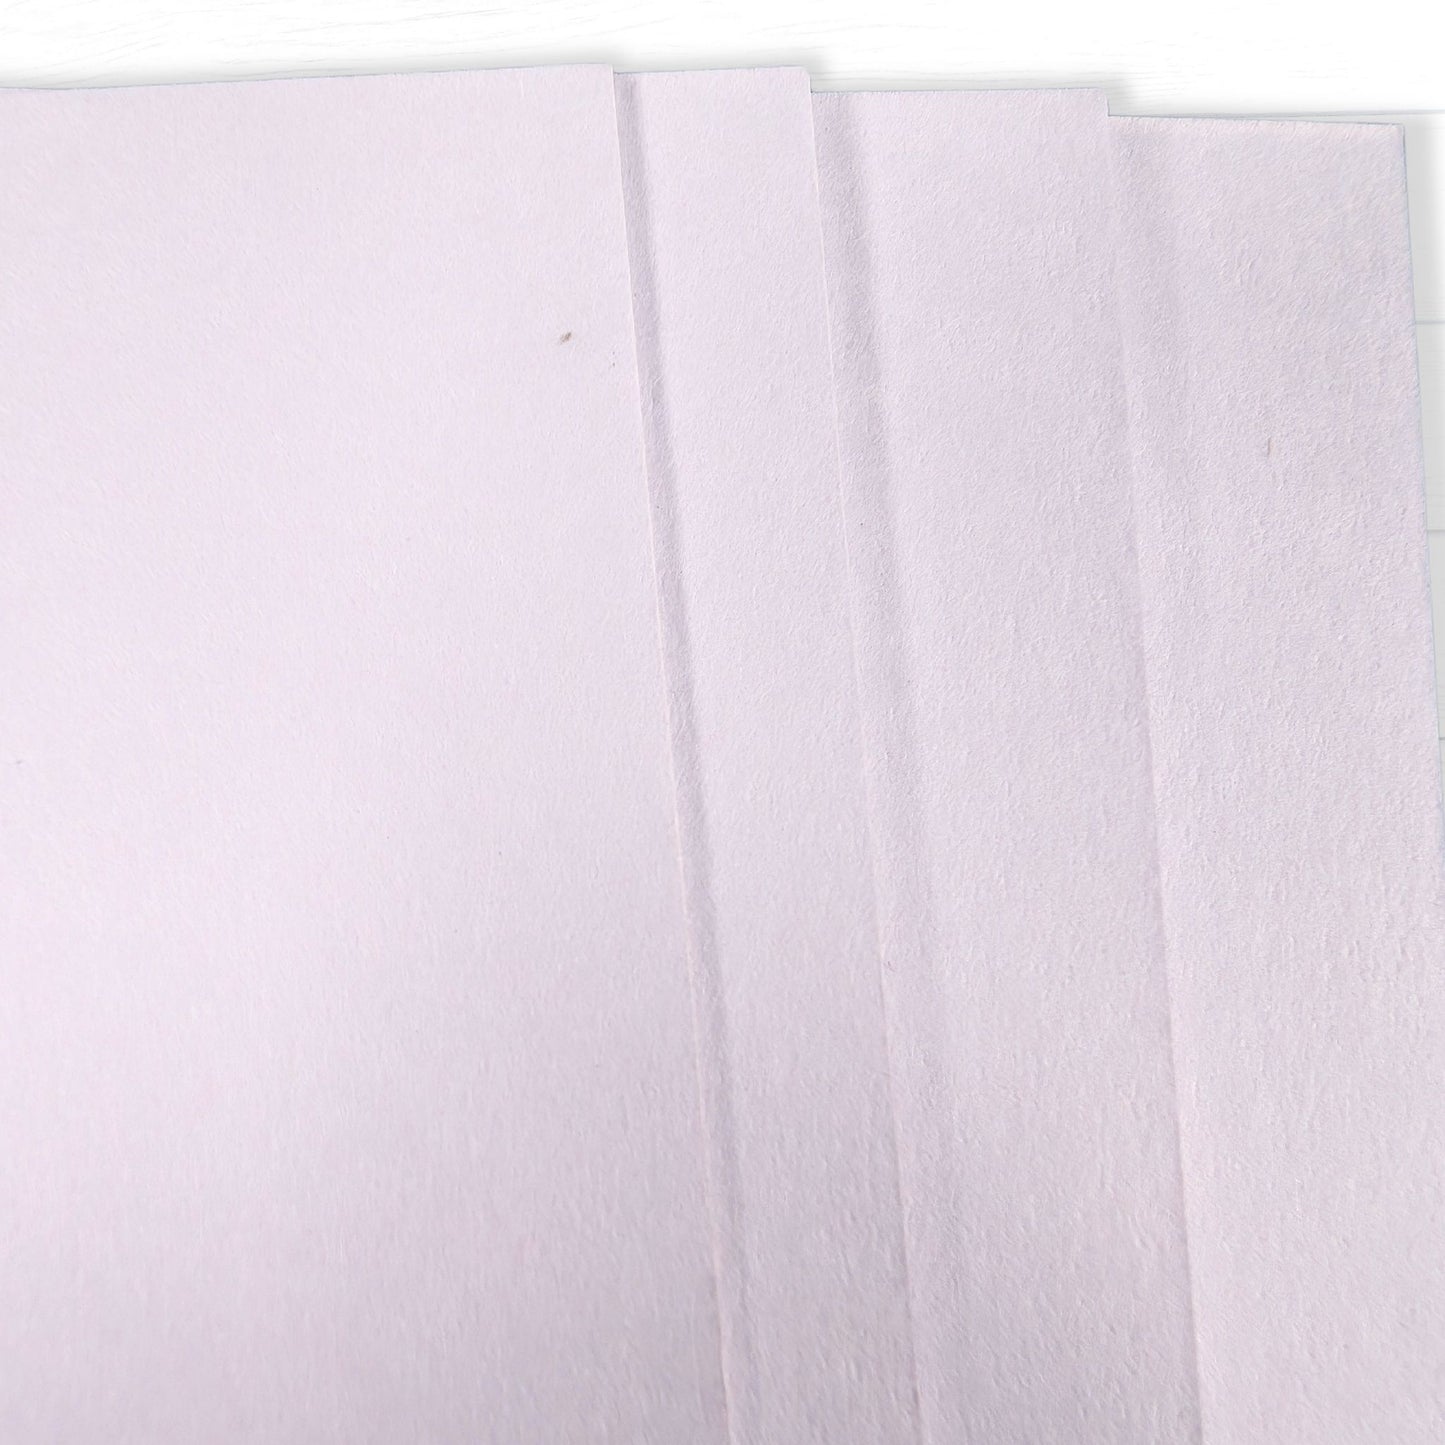 A4 Antique Card 165gsm Sheets for Drawing, Painting, Printing, Arts & Crafts.